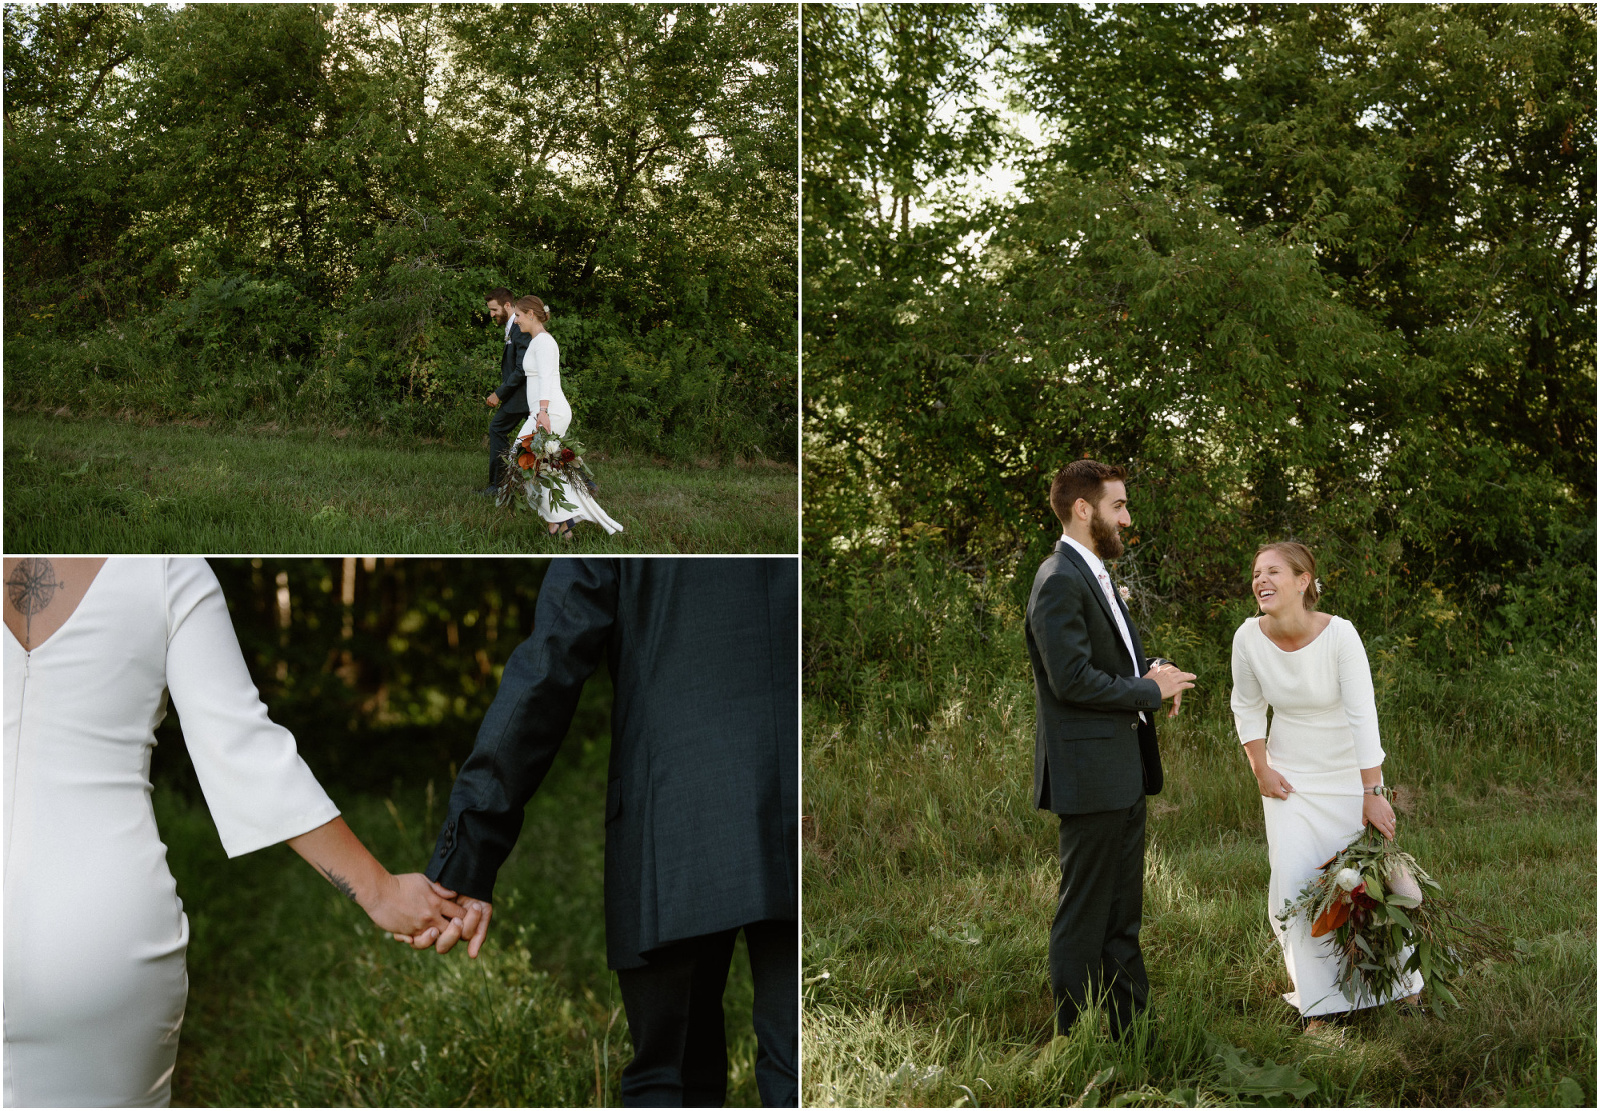 Candid style bride and groom portraits